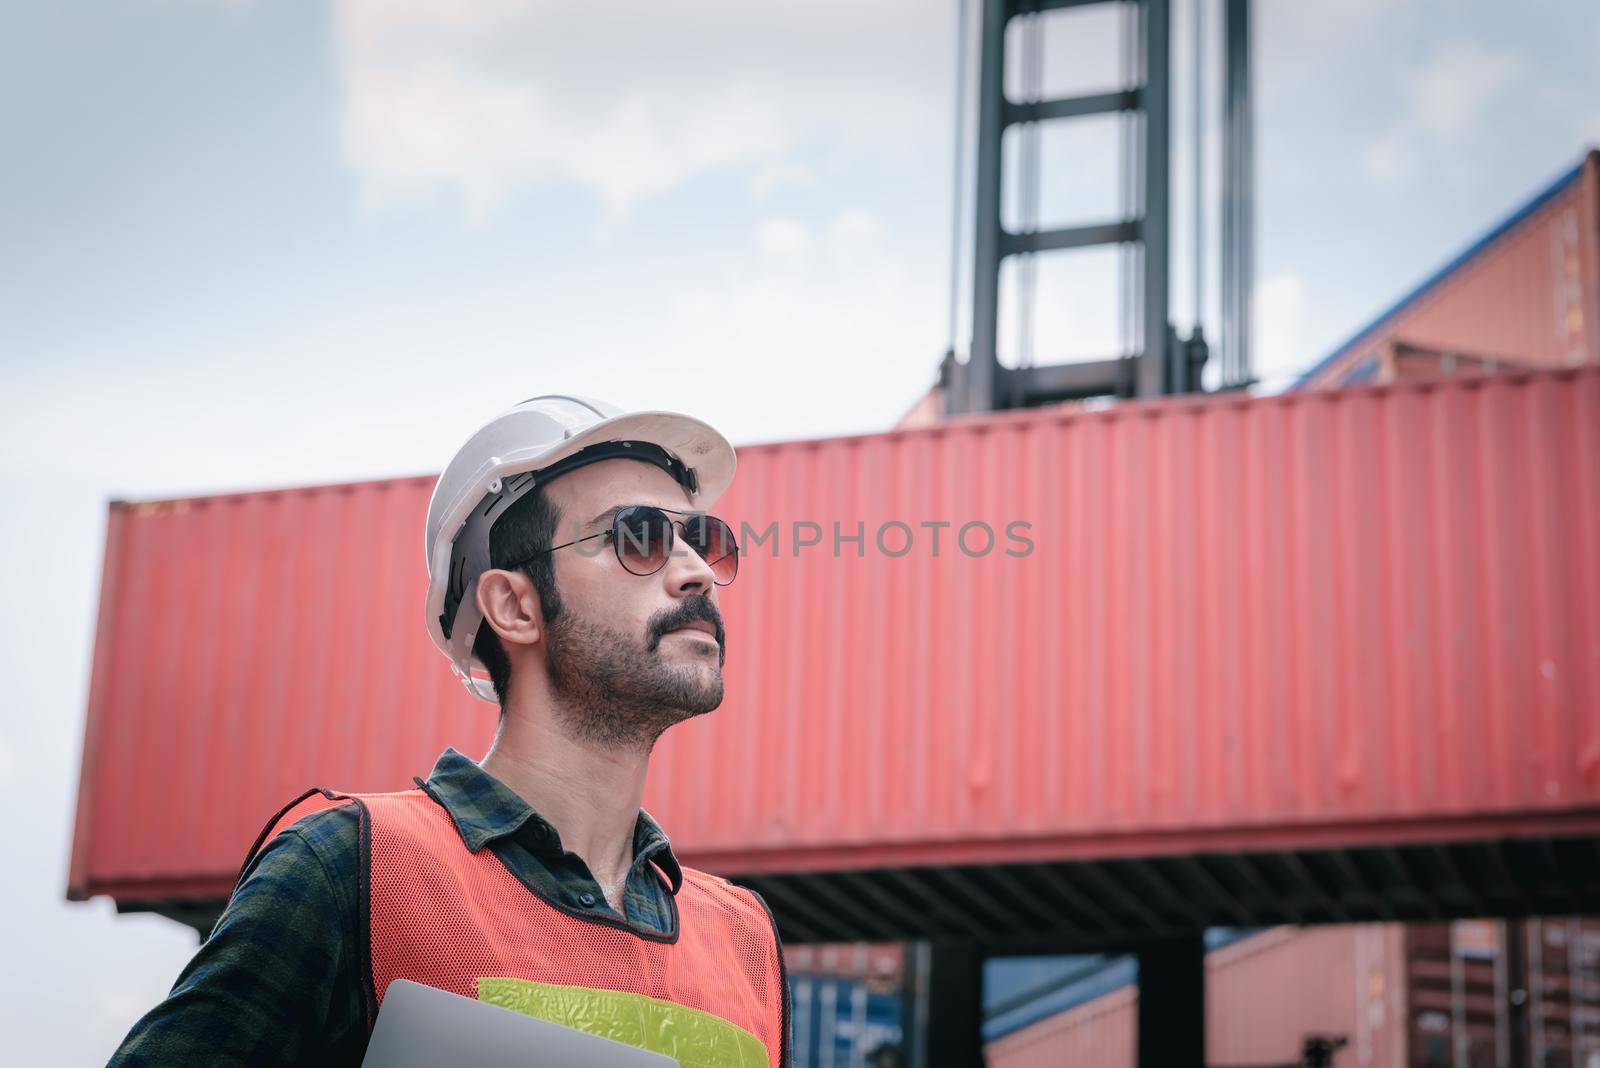 Portrait of Confident Transport Engineer Man in Safety Equipment Standing in Container Ship Yard. Transportation Engineering Management and Container Logistics Industry, Shipping Worker Occupation